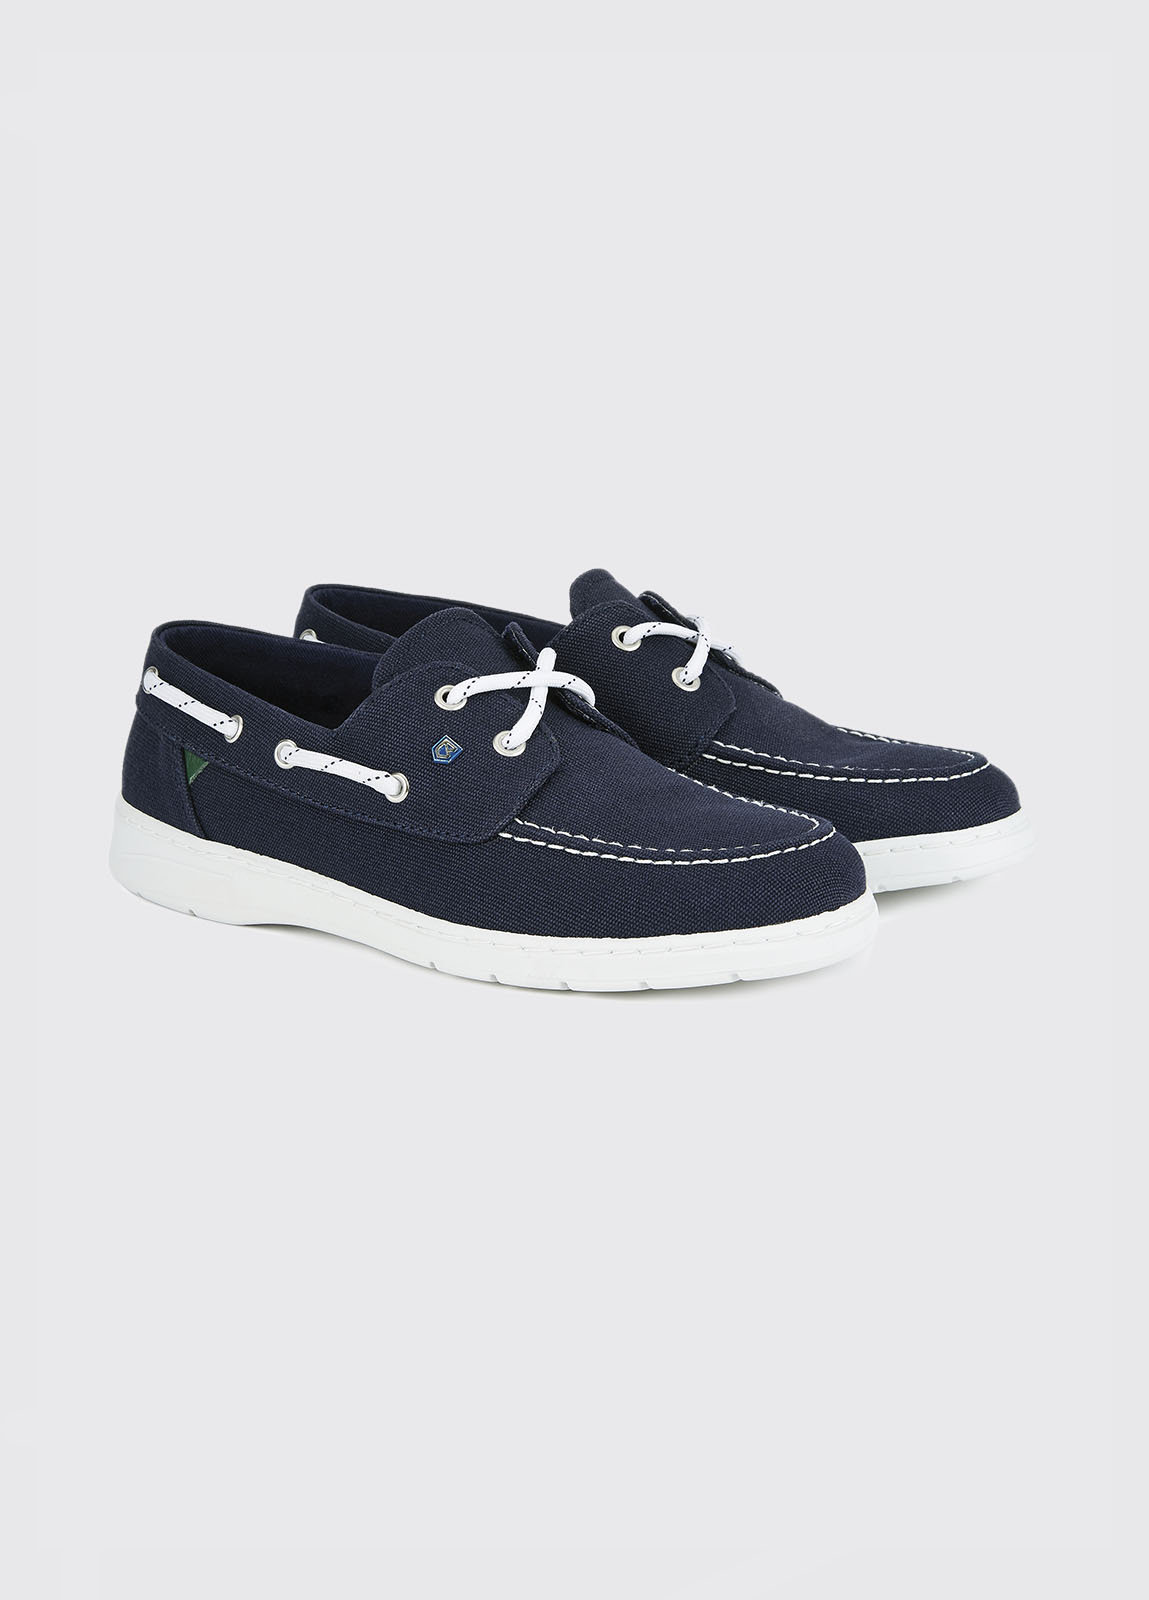 Deck Boat Shoes for Casual Beach Outings